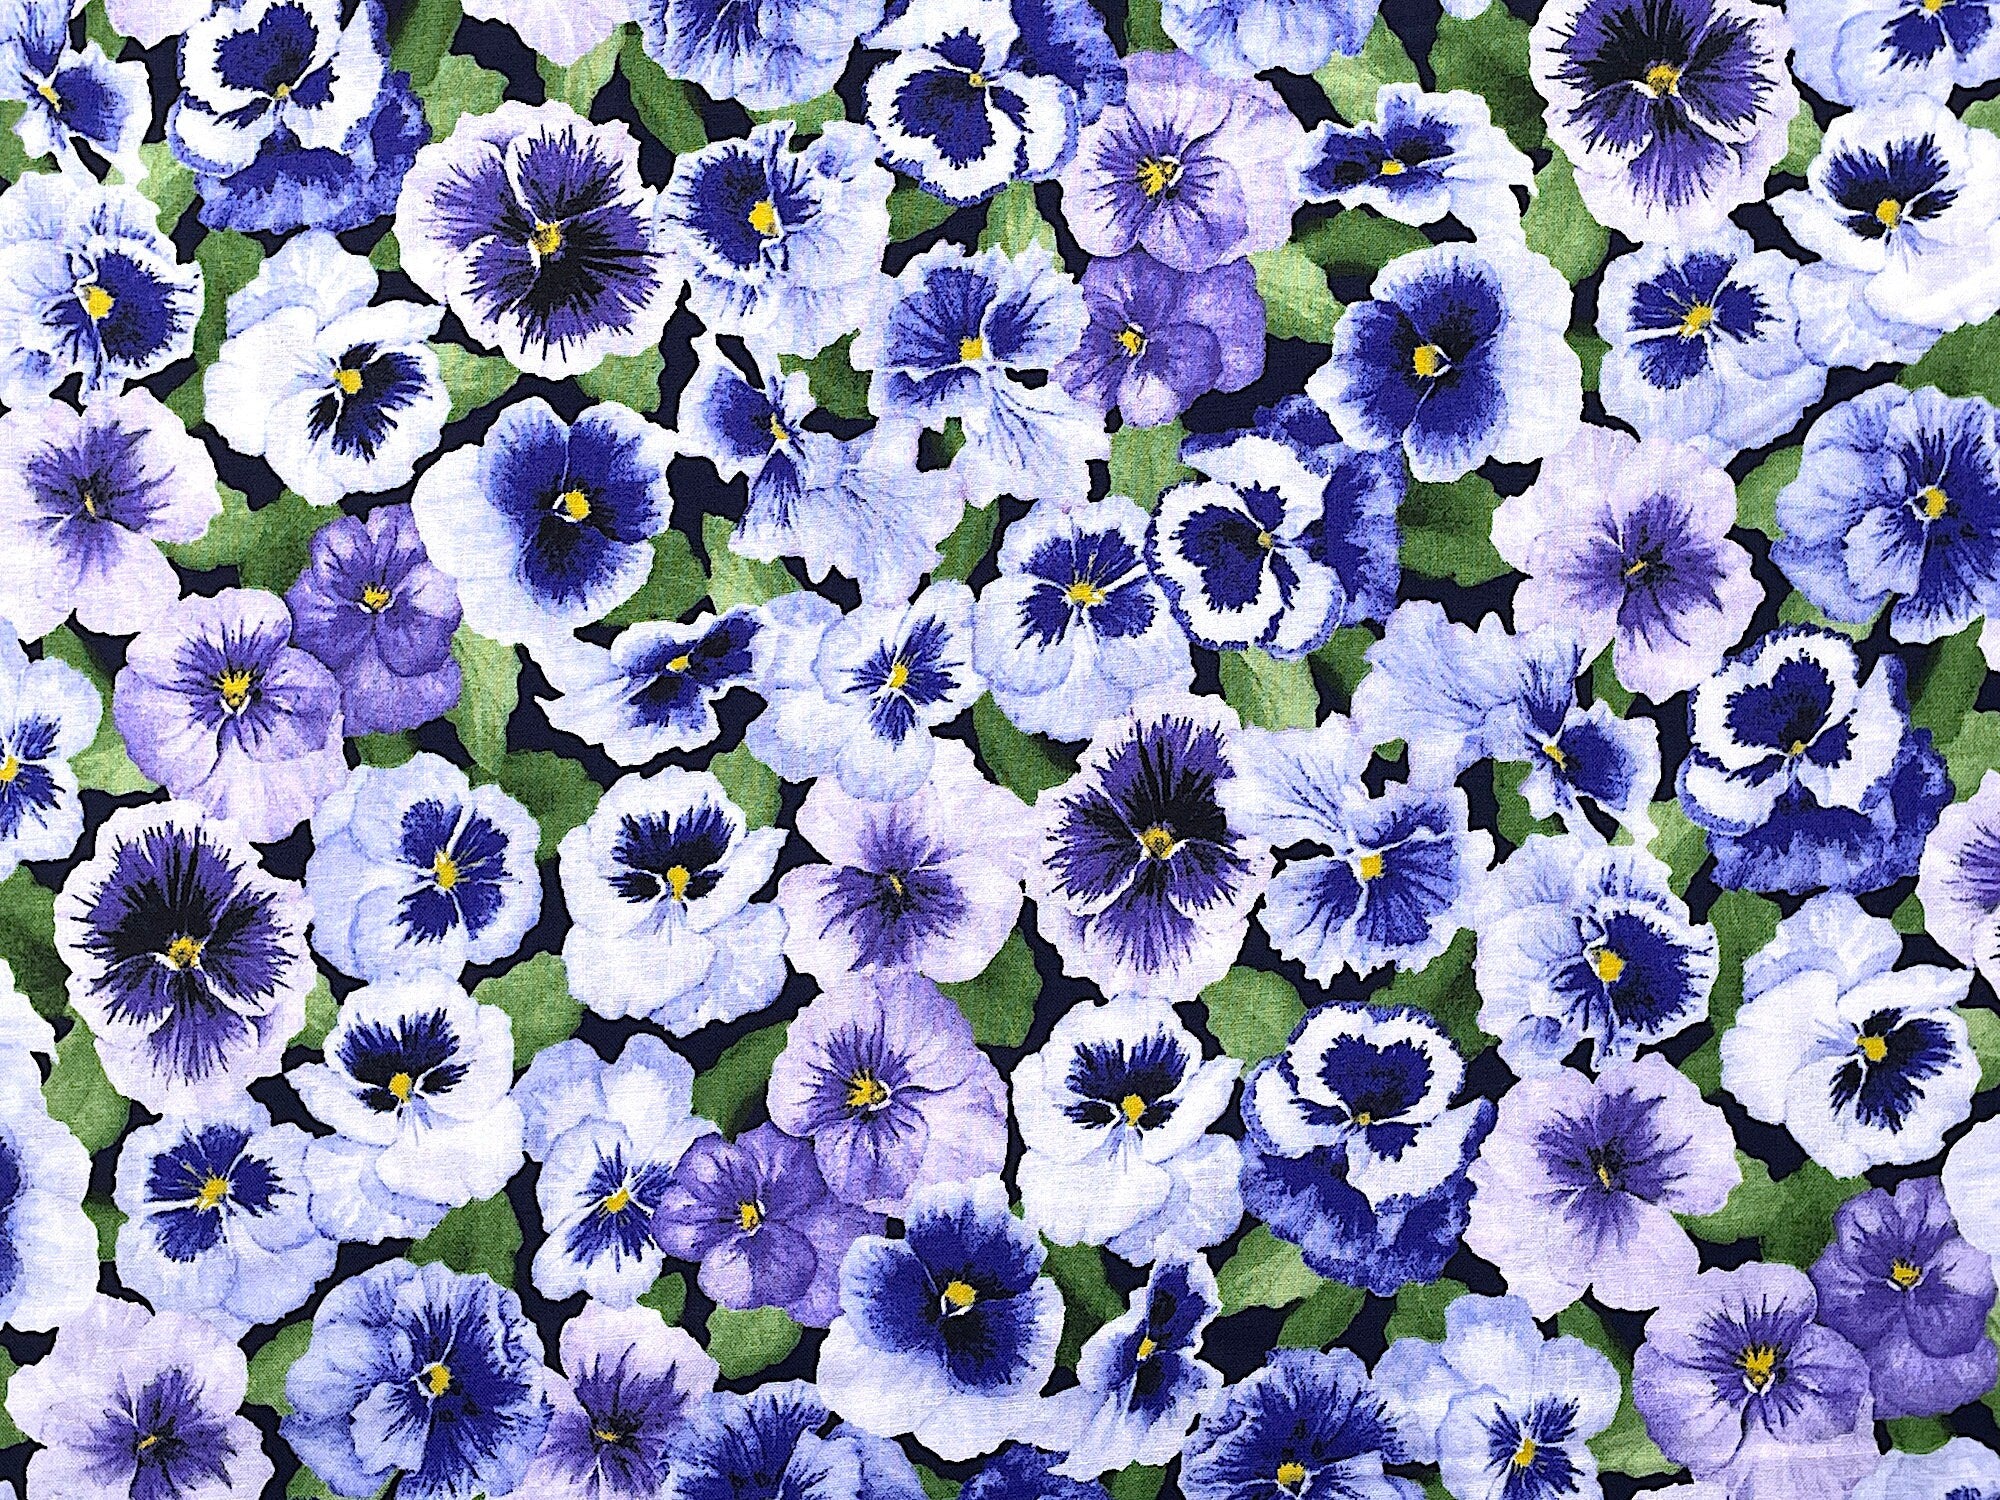 This cotton fabric is covered with purple pansies and green leaves. The pansies have several shades of purple.